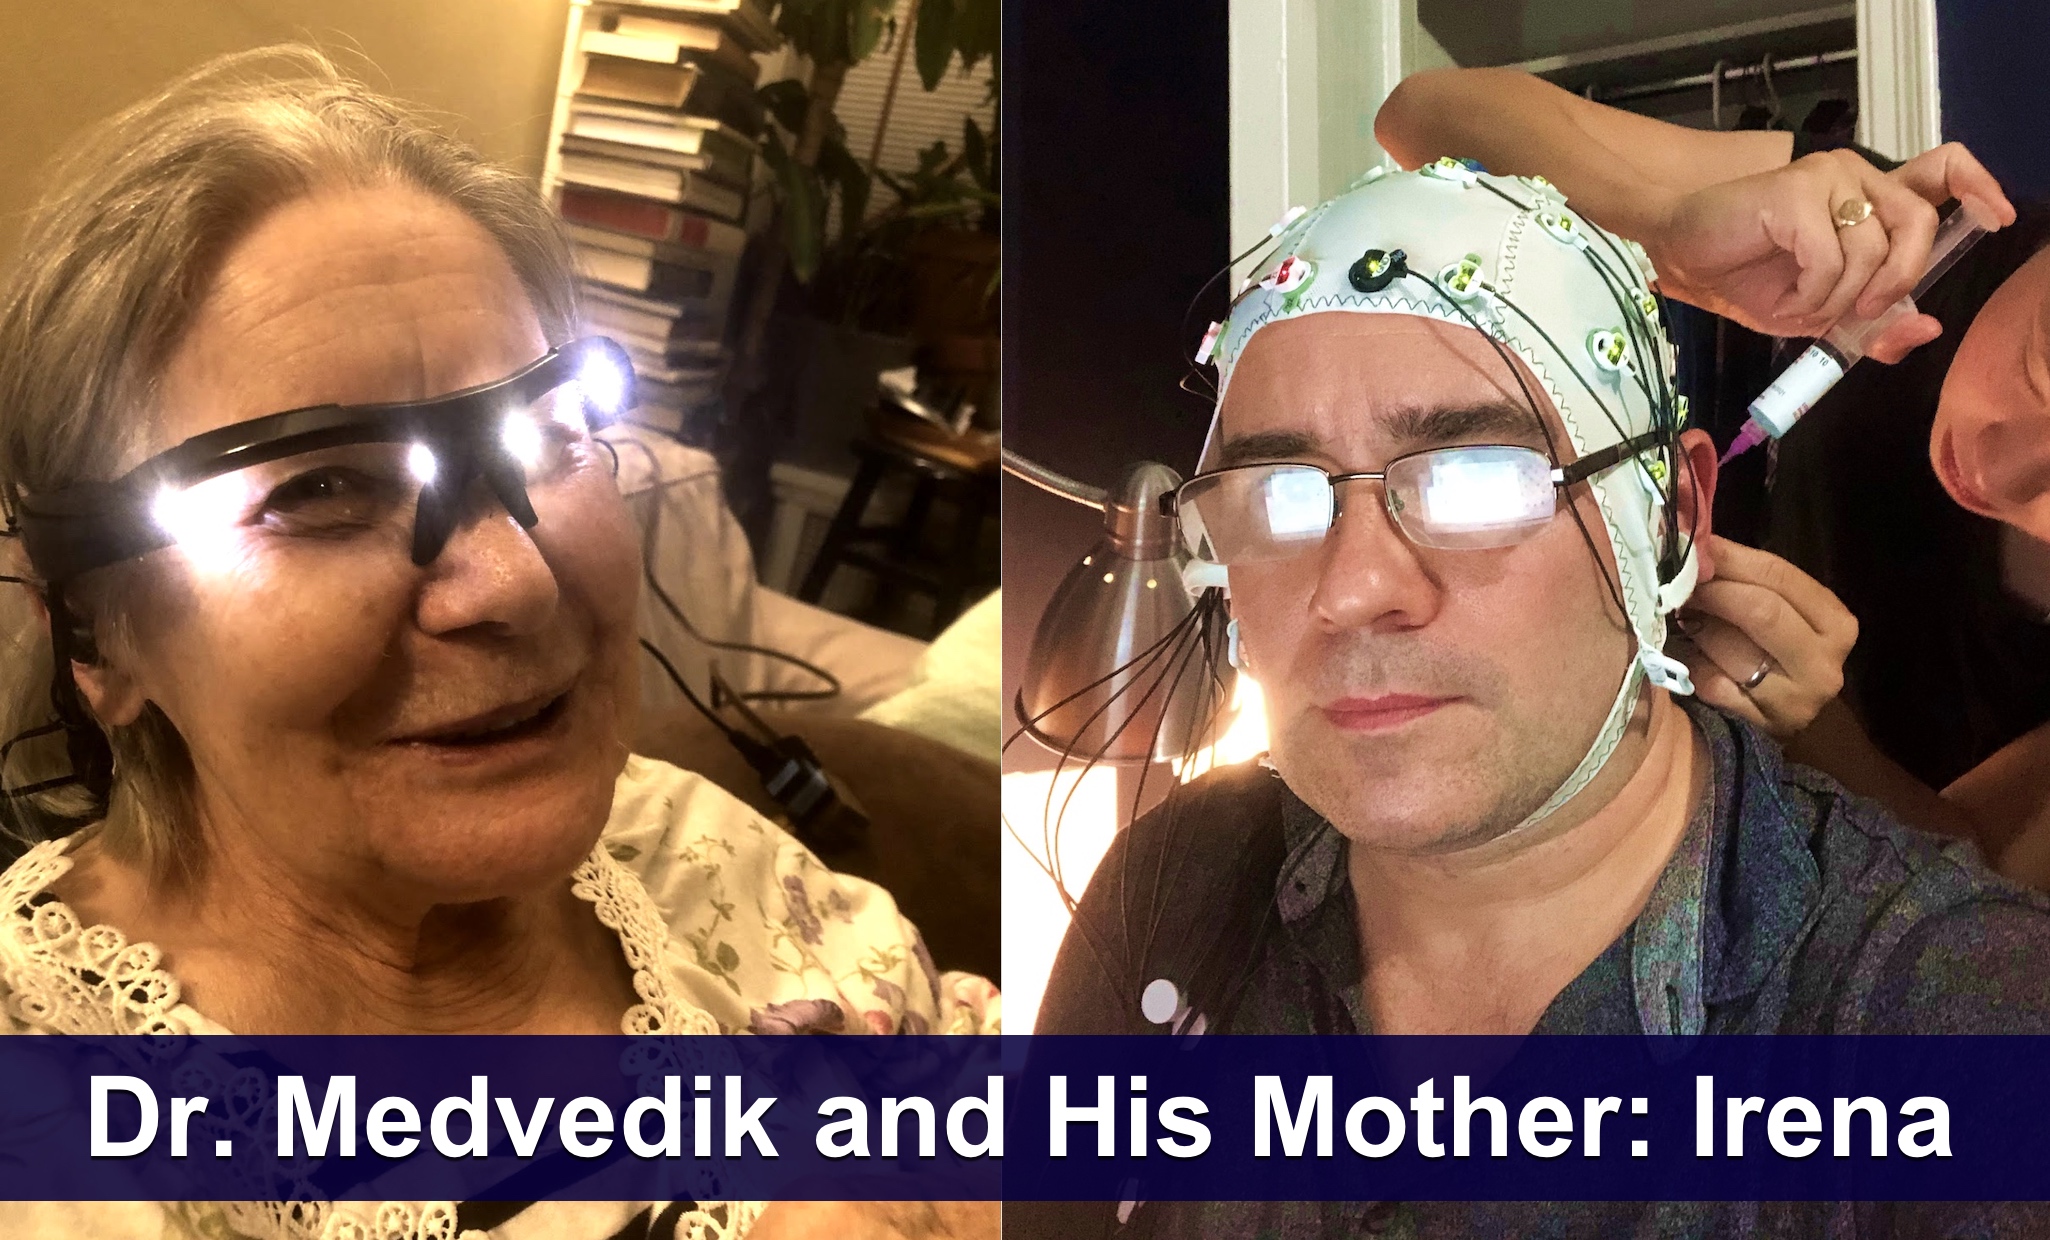 Mindset is a light and sound headset for treating Alzheimer's disease.